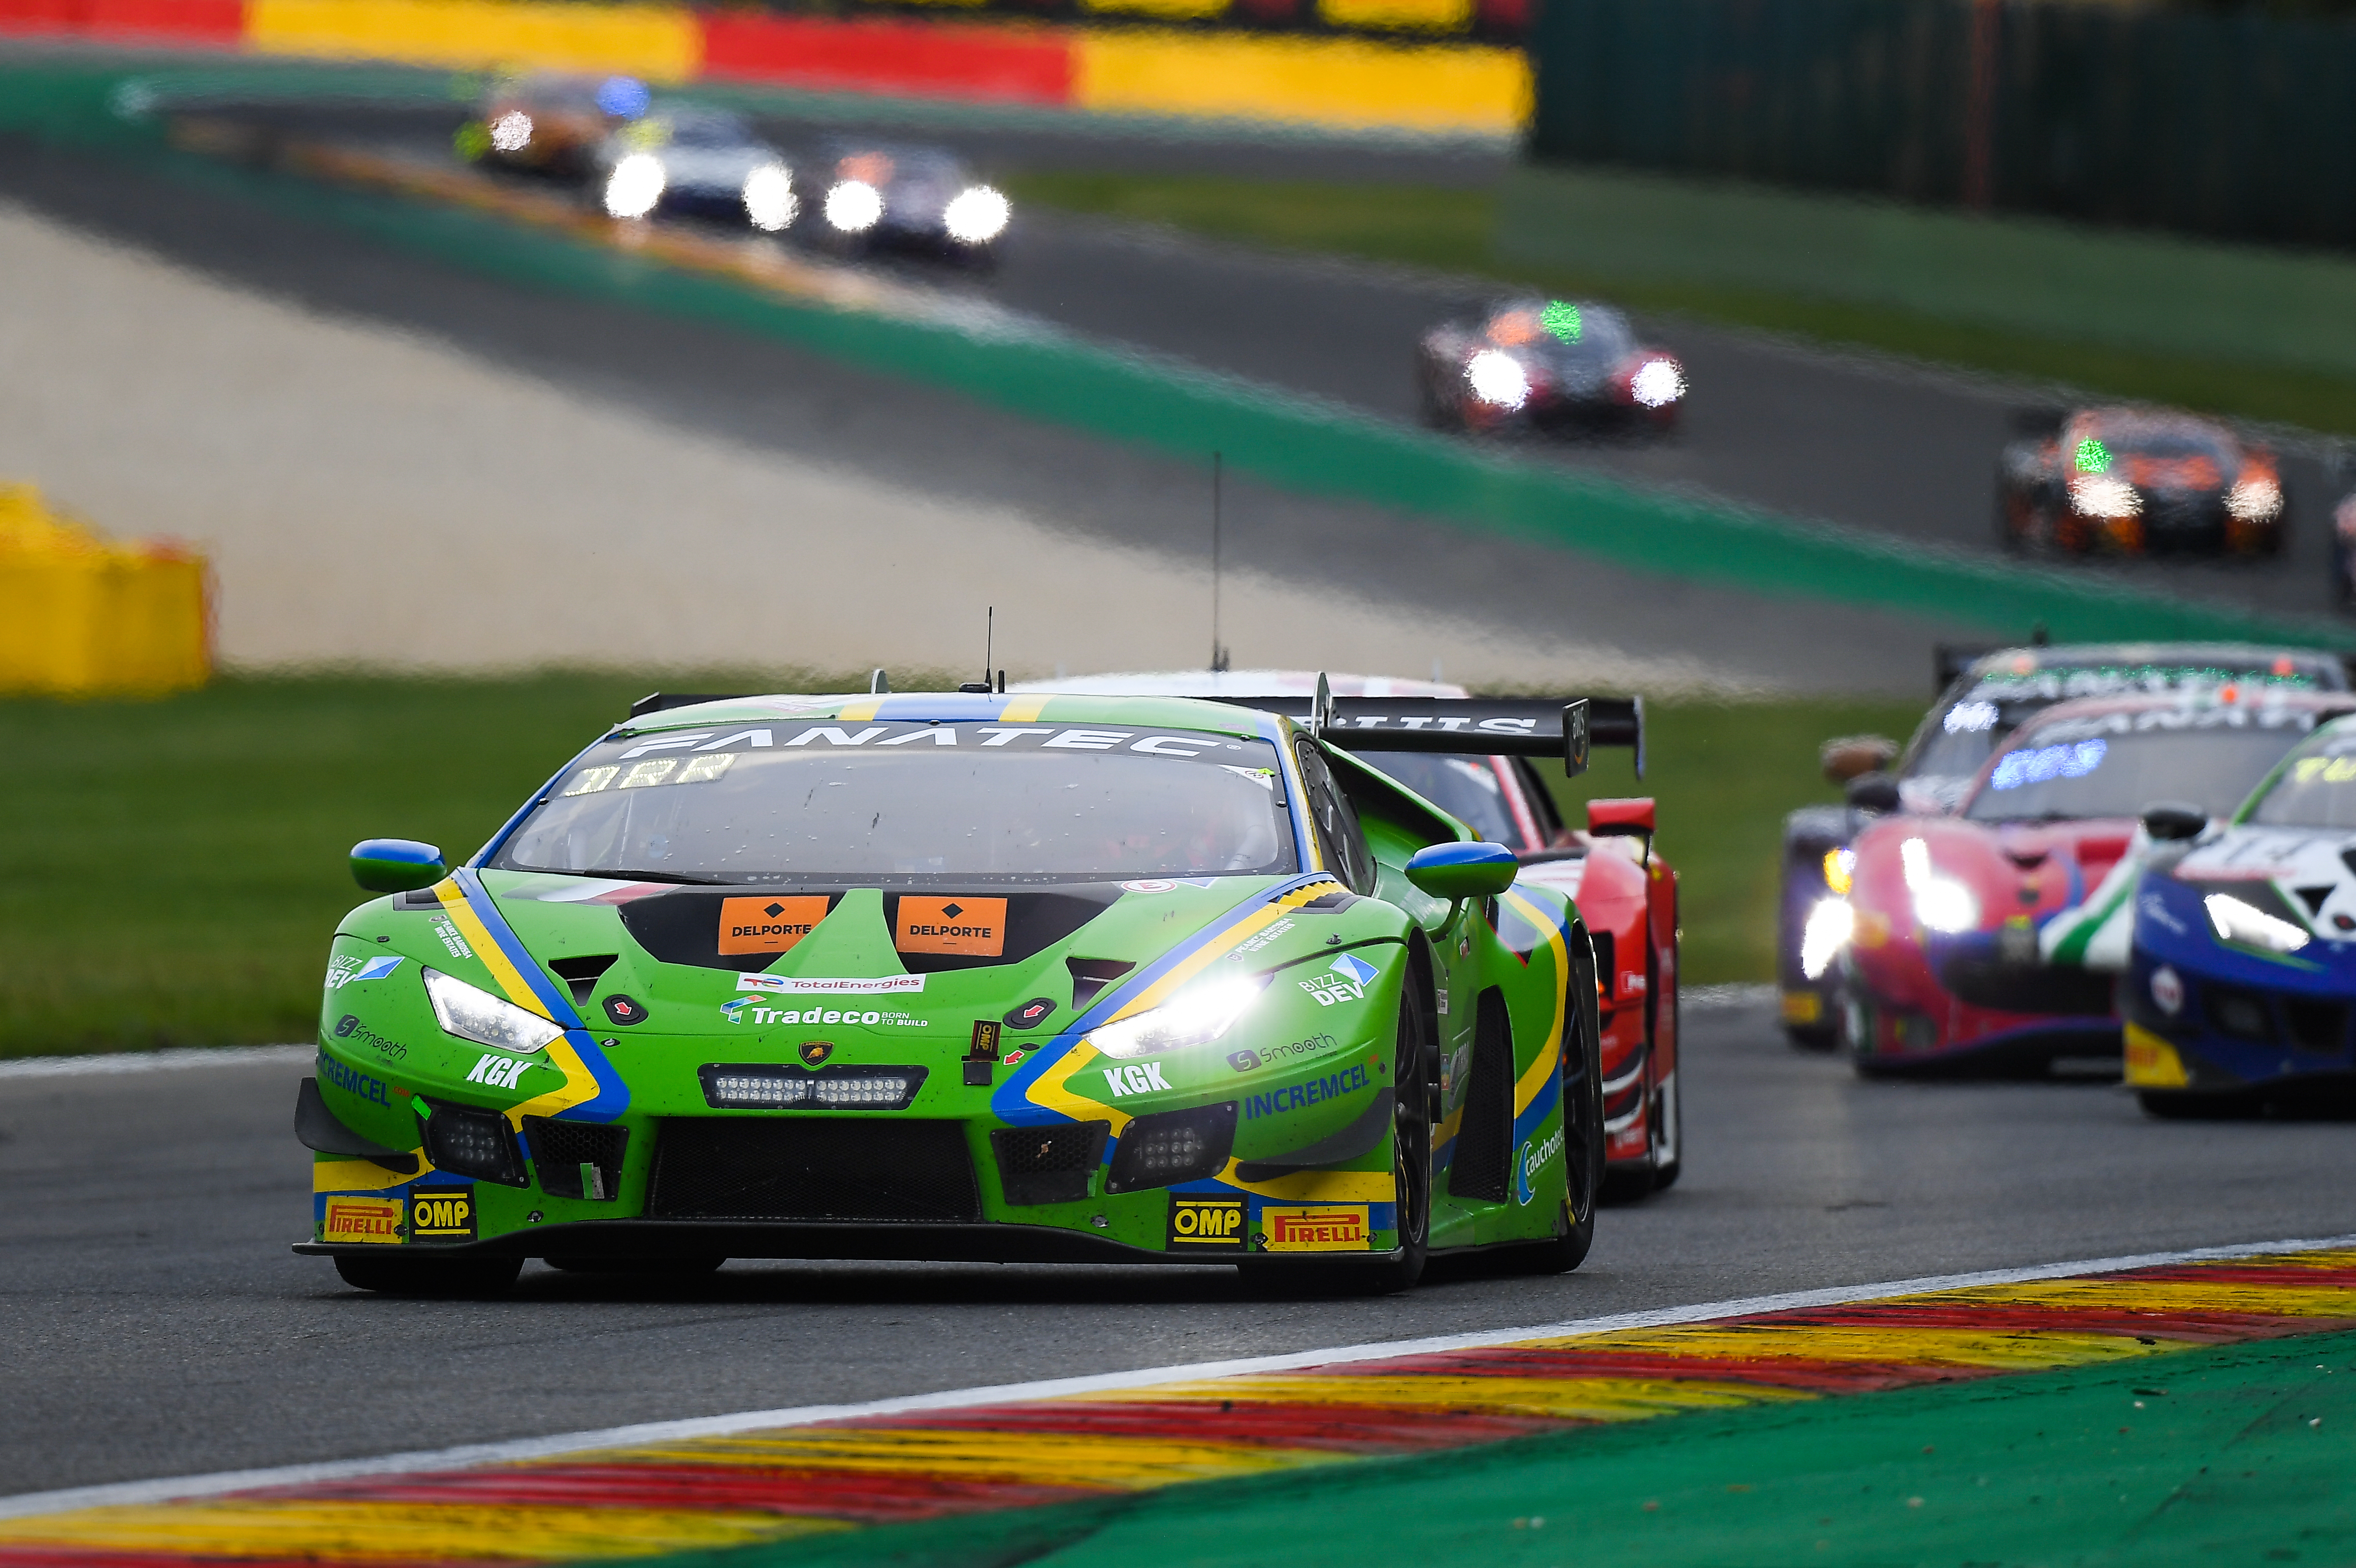 SILVER CUP FOURTH PLACE IN SPA ENDURANCE RACE